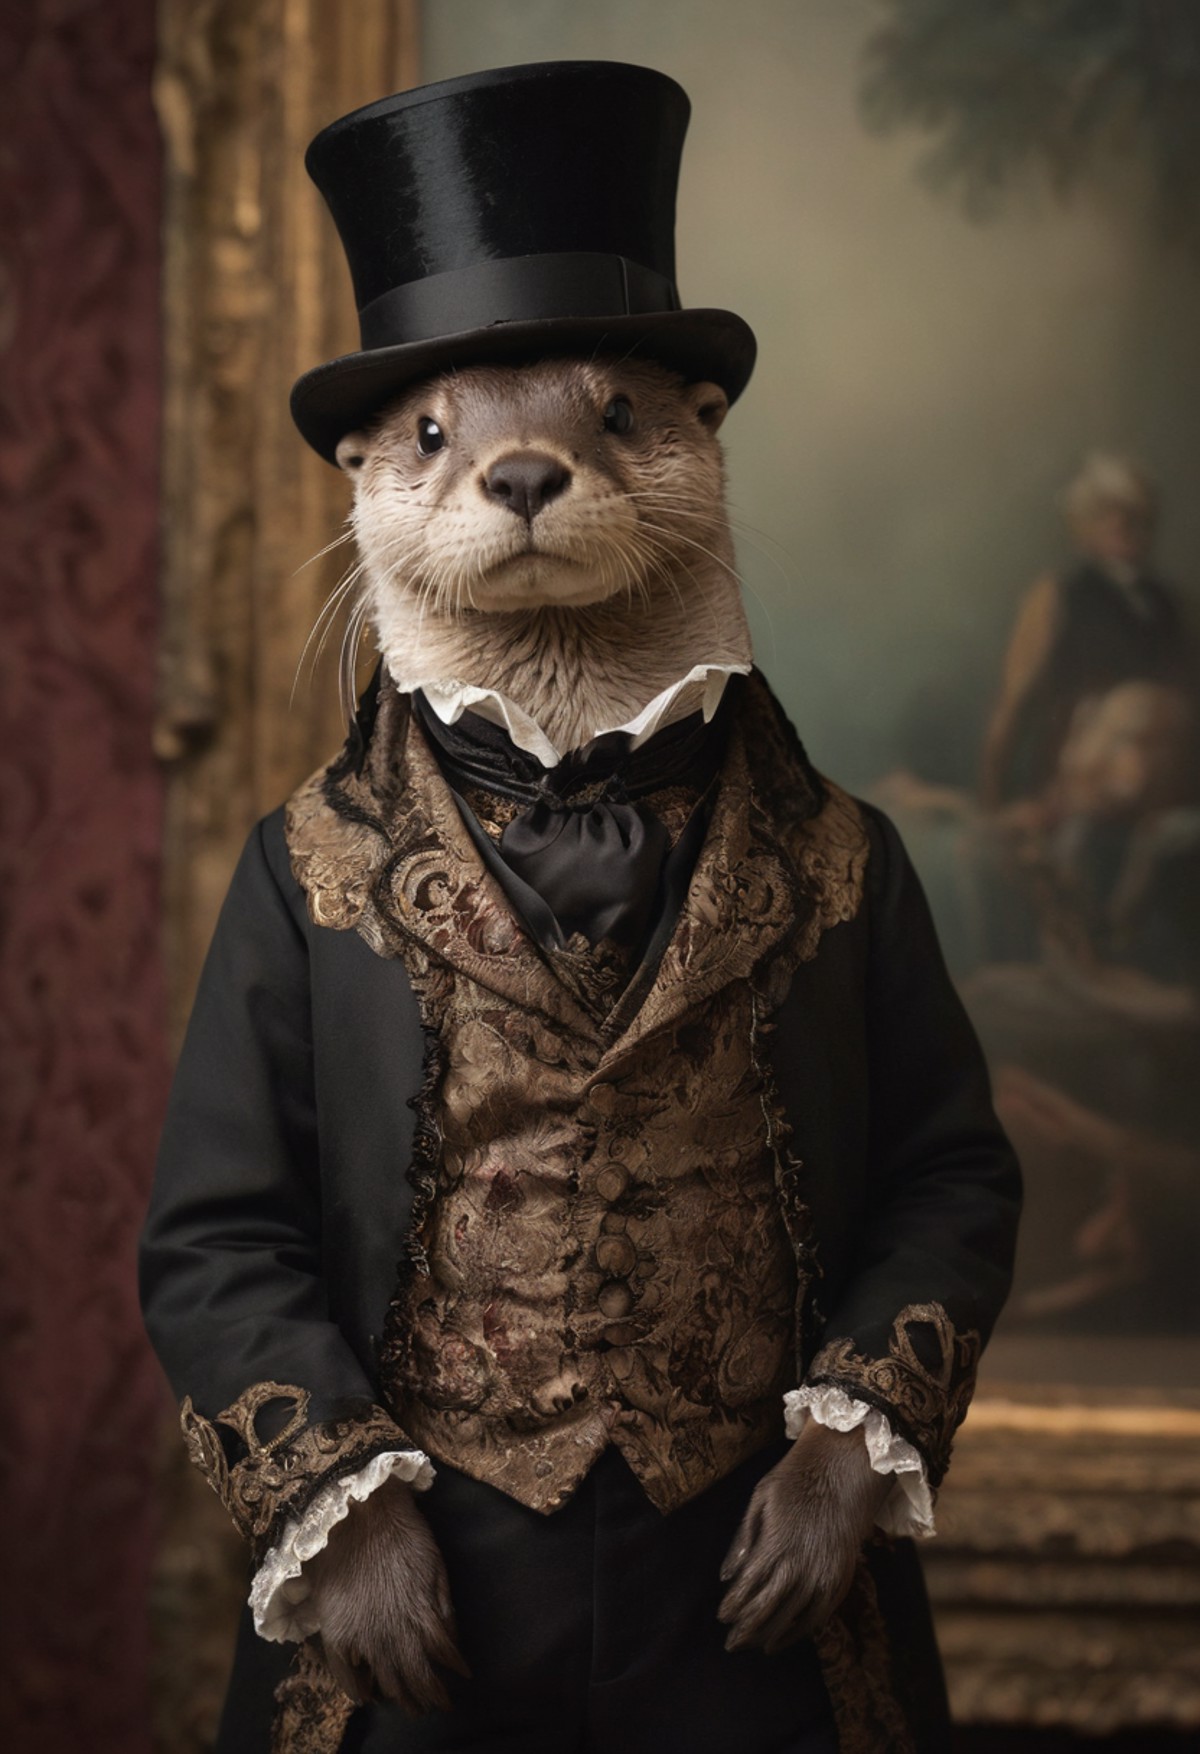 A charming otter poses in an elaborate Victorian outfit, exuding regality and whimsy. Otter with whiskers, ornate Victoria...